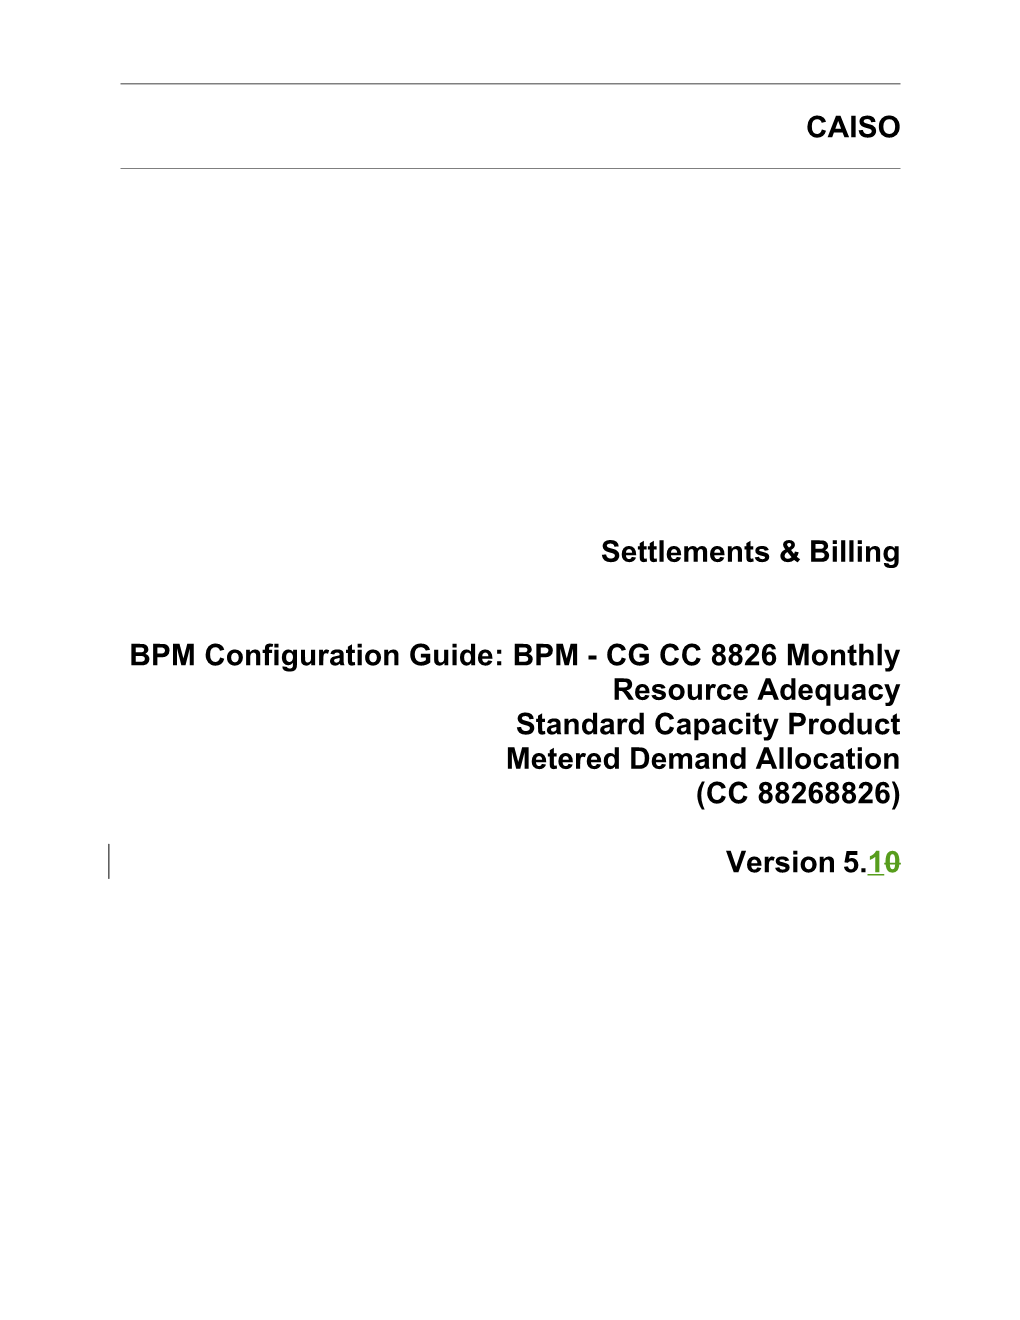 BPM - CG CC 8826 Monthly Resource Adequacy Standard Capacity Product Metered Demand Allocation